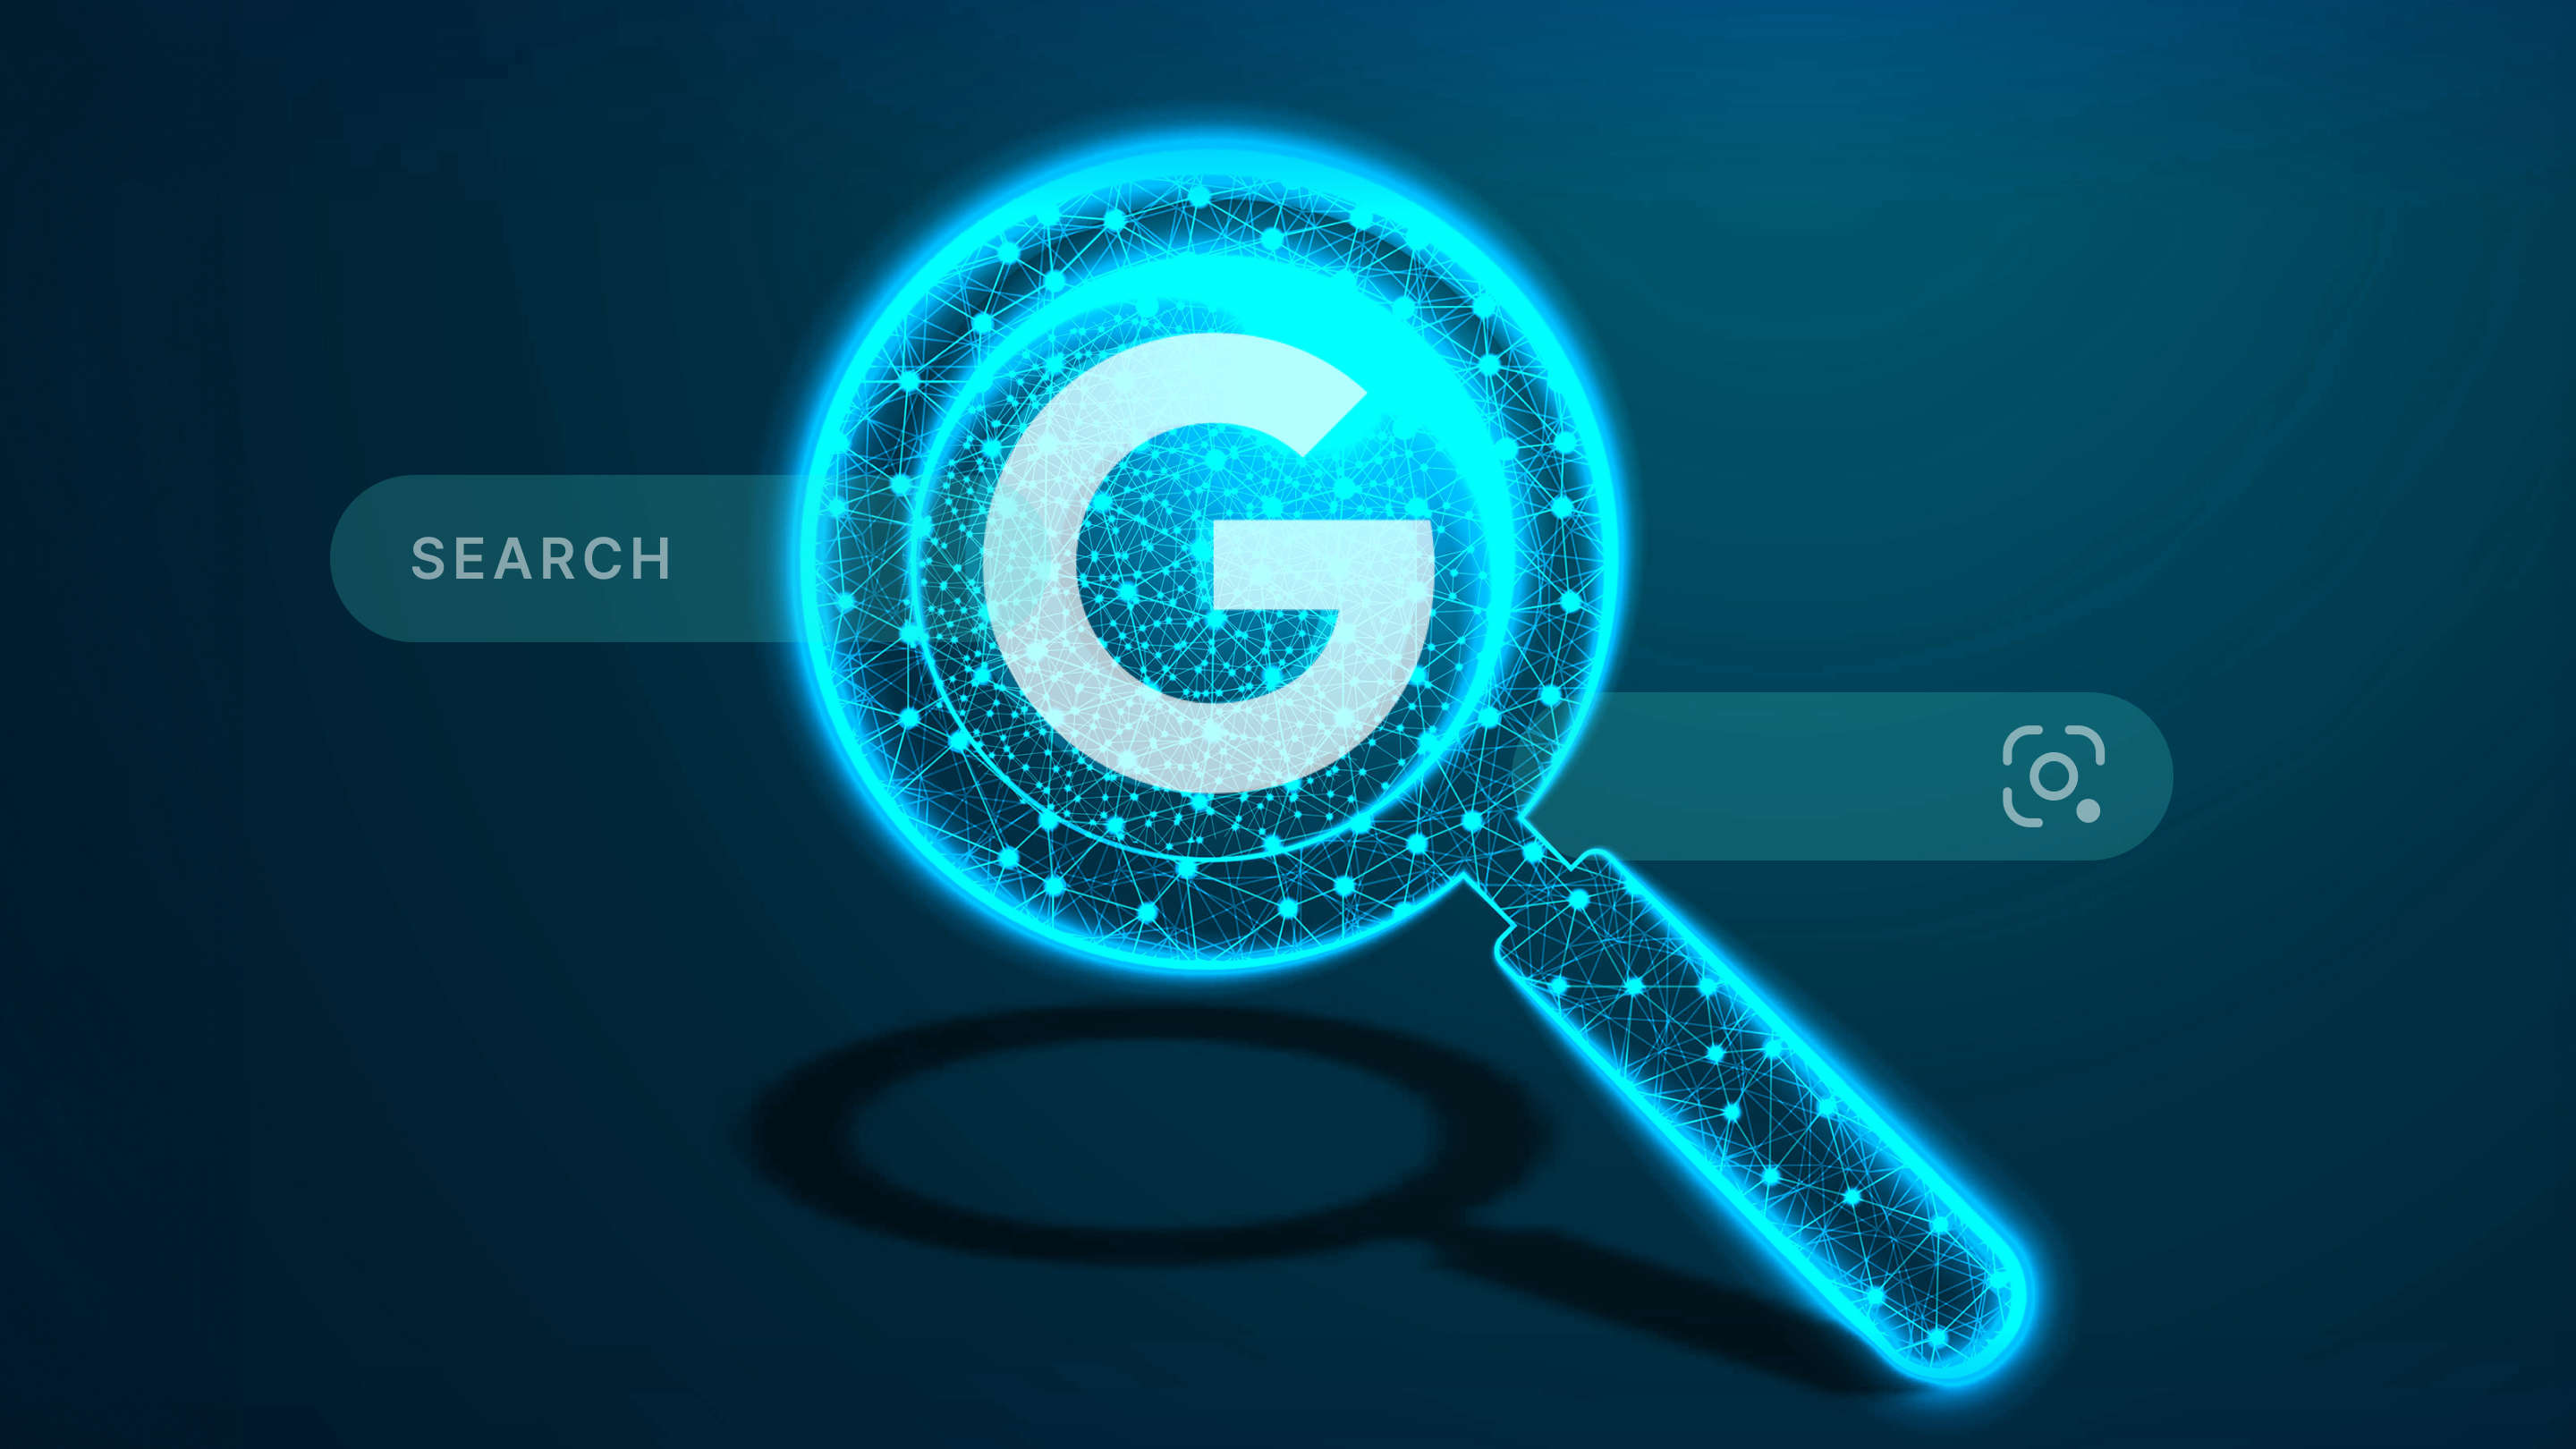 AI-Powered Search: What We Know About The Search Generative Experience So Far